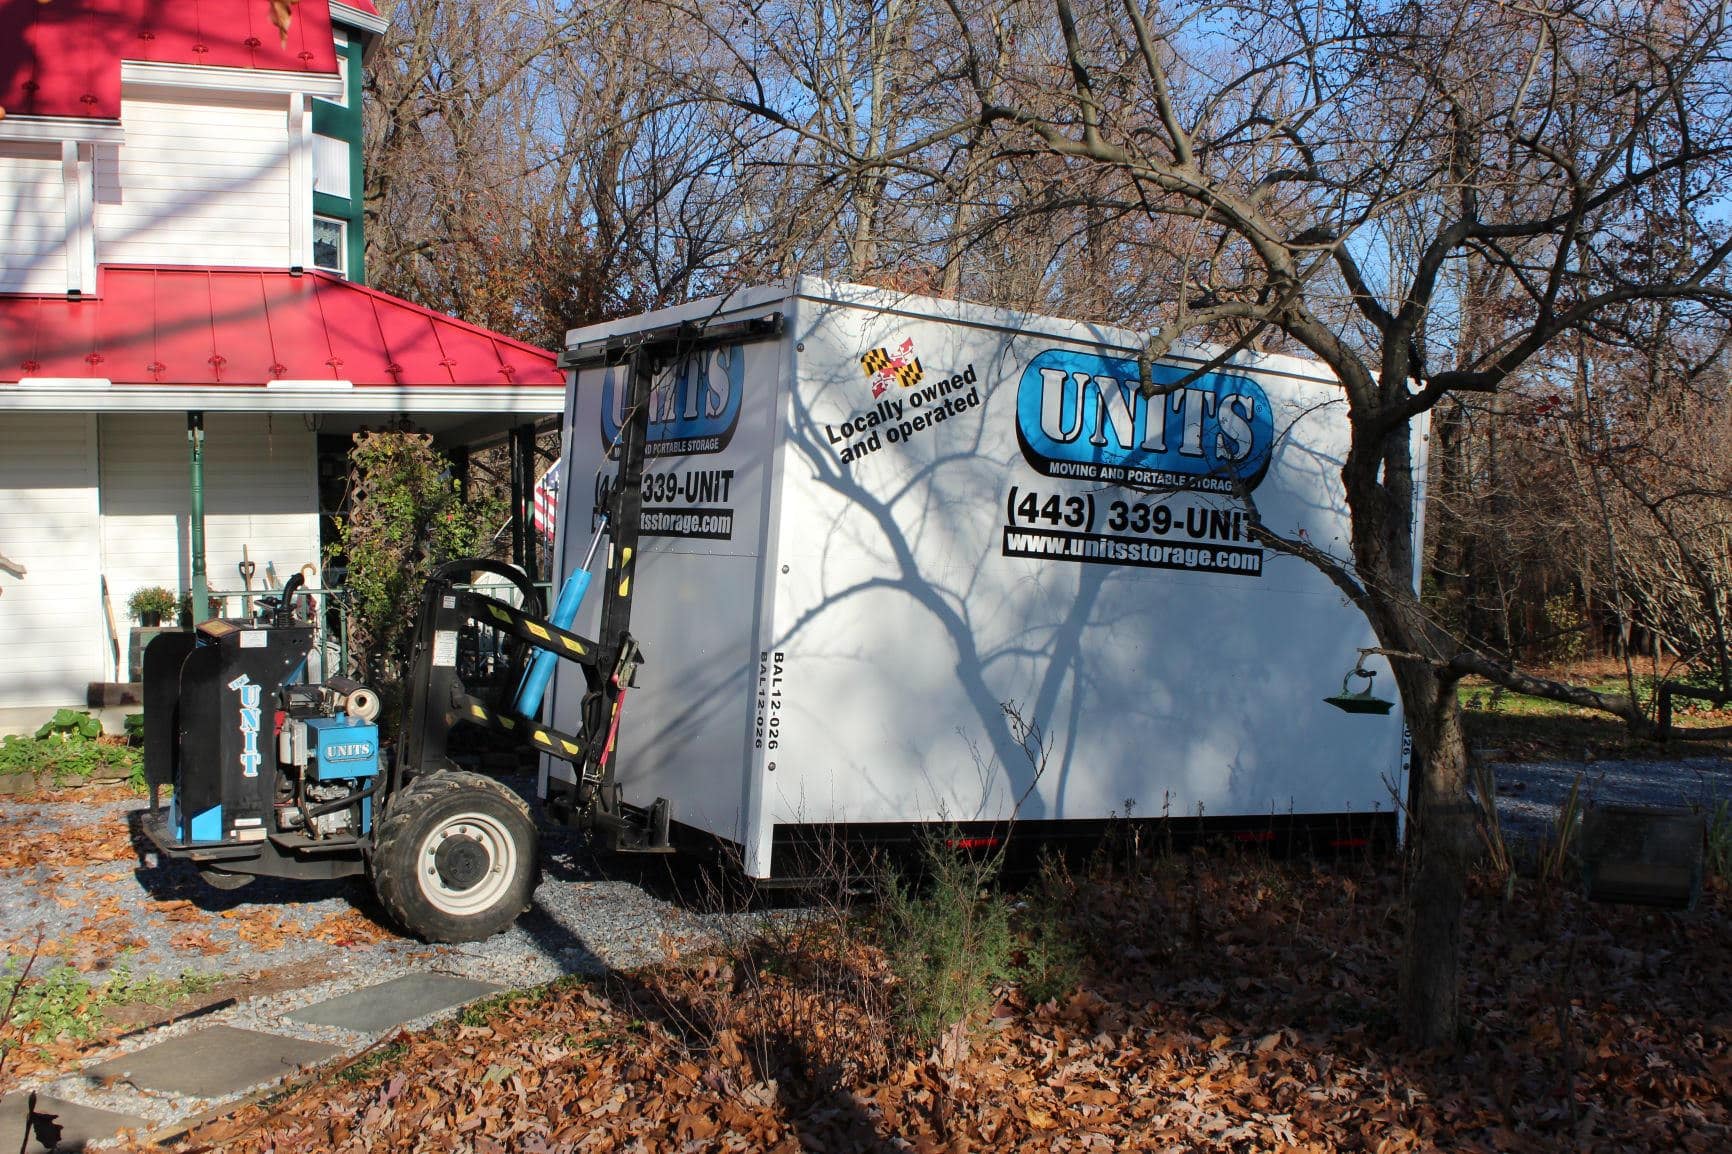 UNITS Moving and Portable Storage Container in front yard in Baltimore Maryland